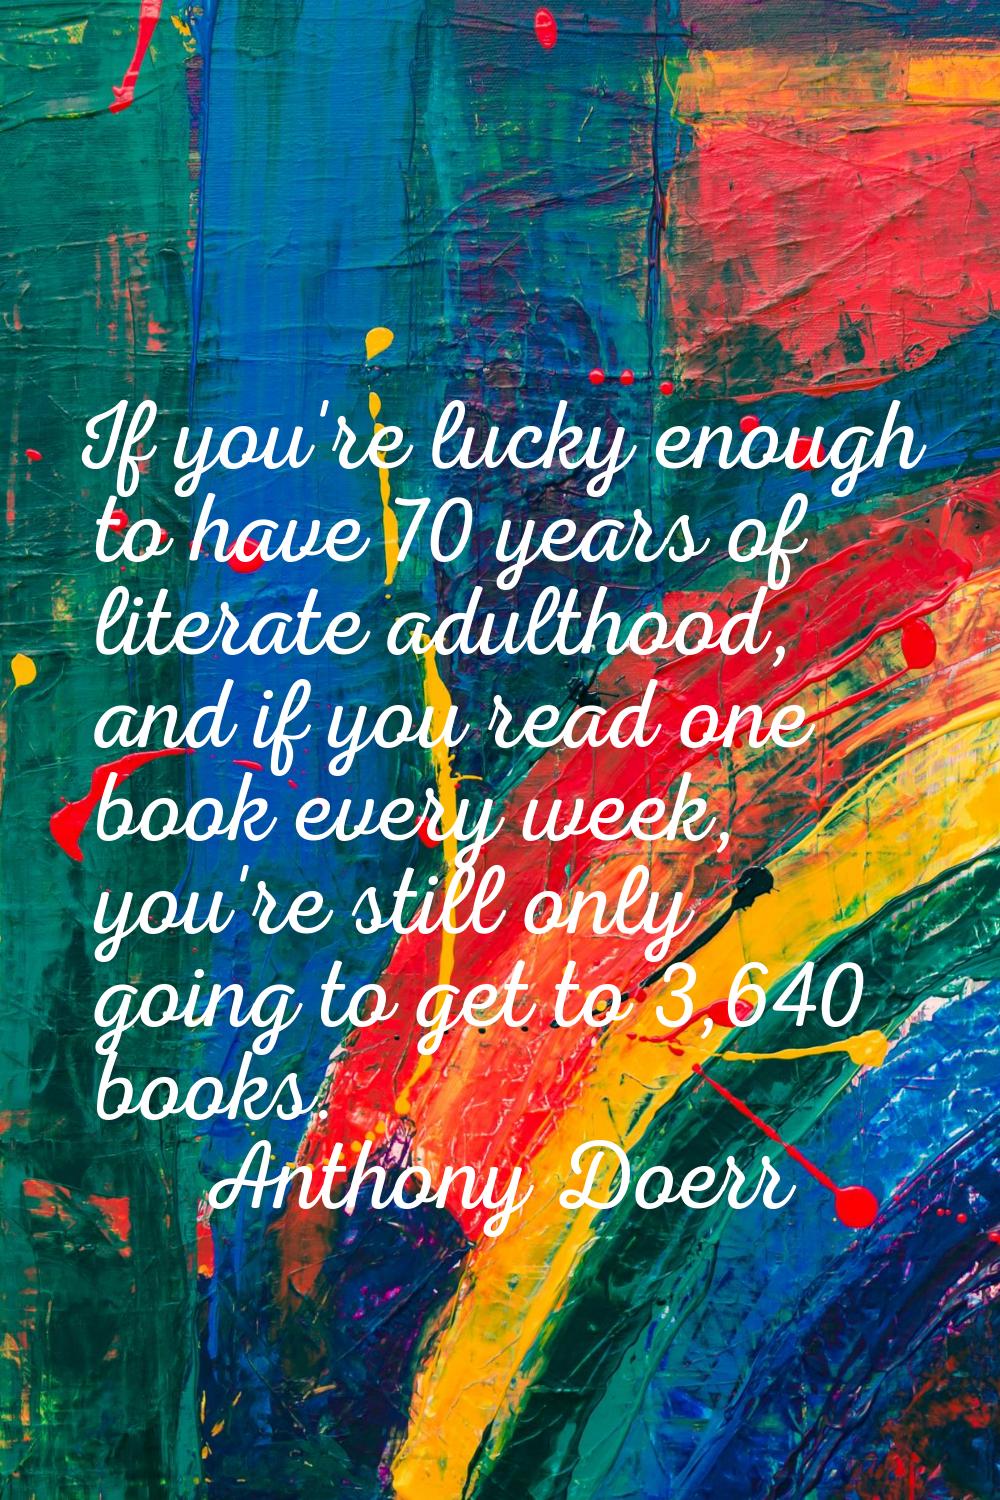 If you're lucky enough to have 70 years of literate adulthood, and if you read one book every week,